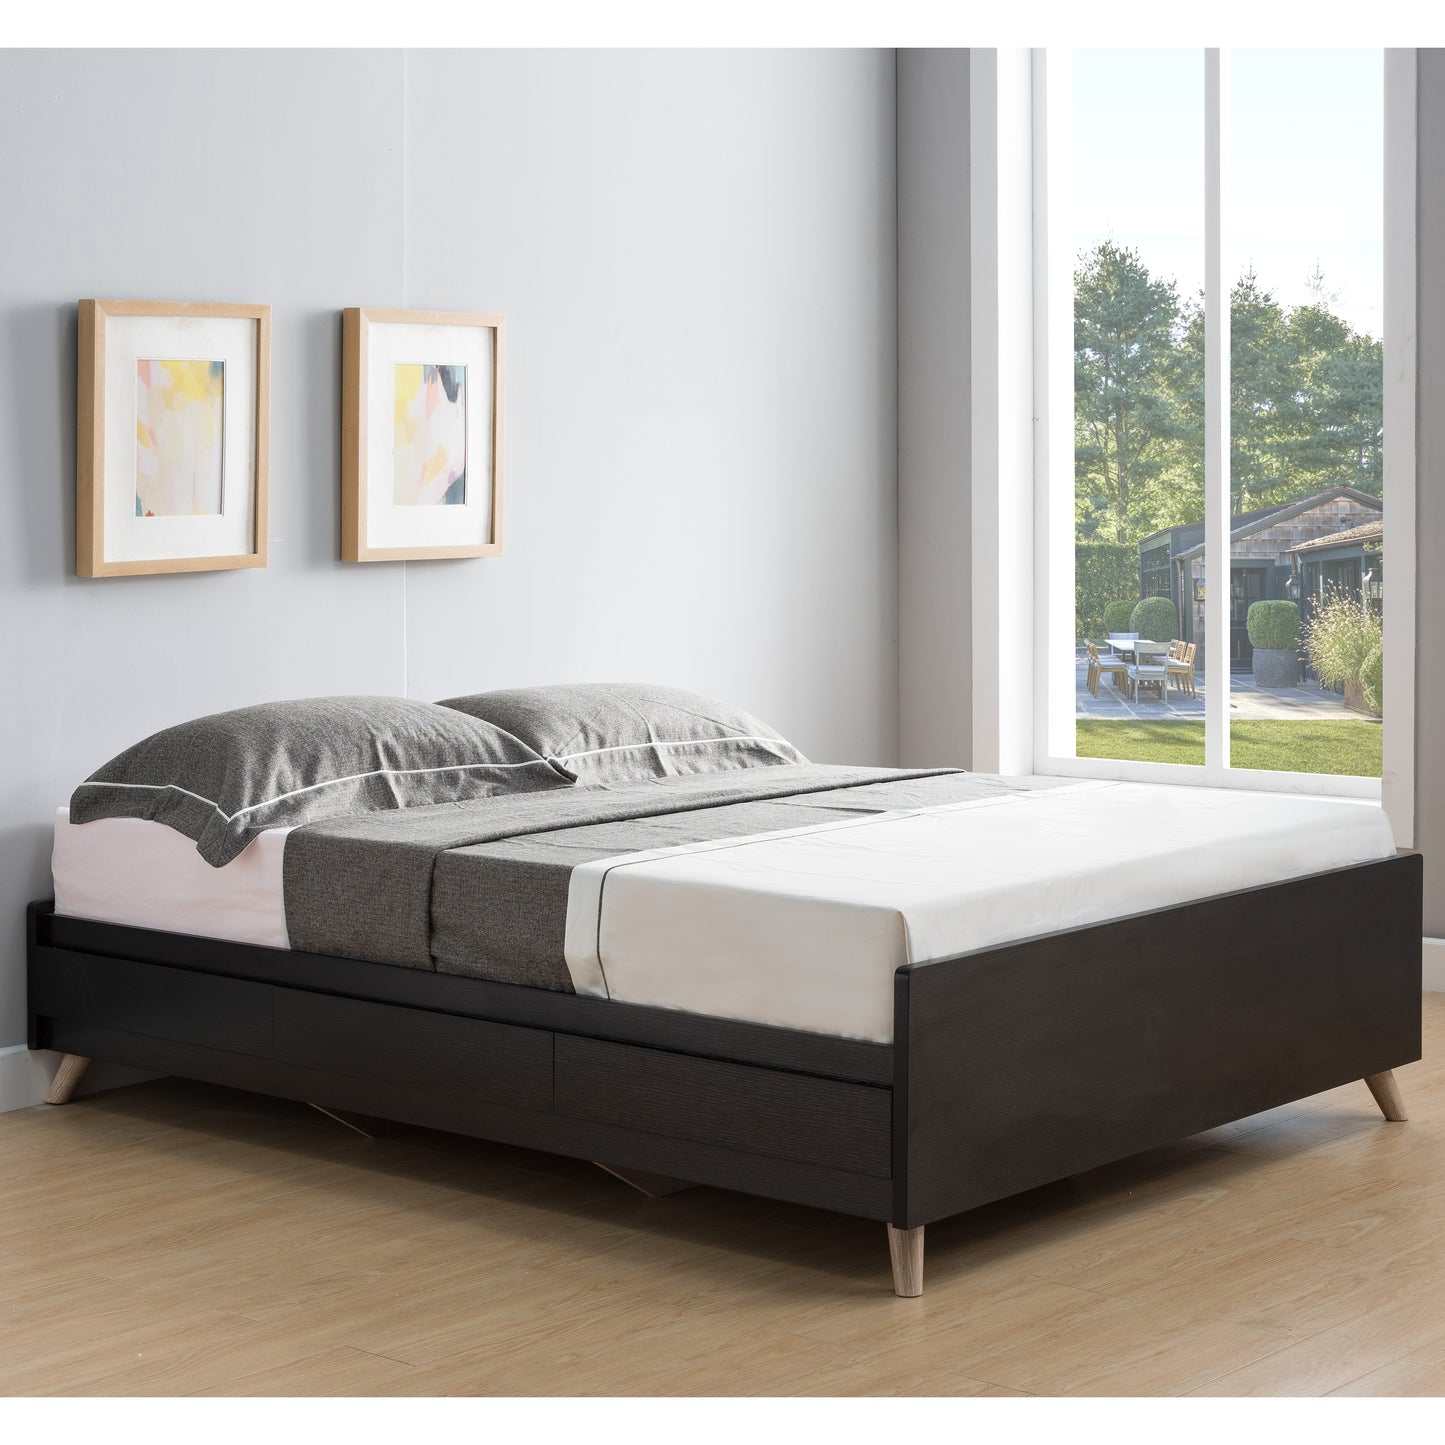 Right angled platform bed only contemporary cappuccino platform storage bed (with a bookcase headboard not shown) in a bedroom with accessories